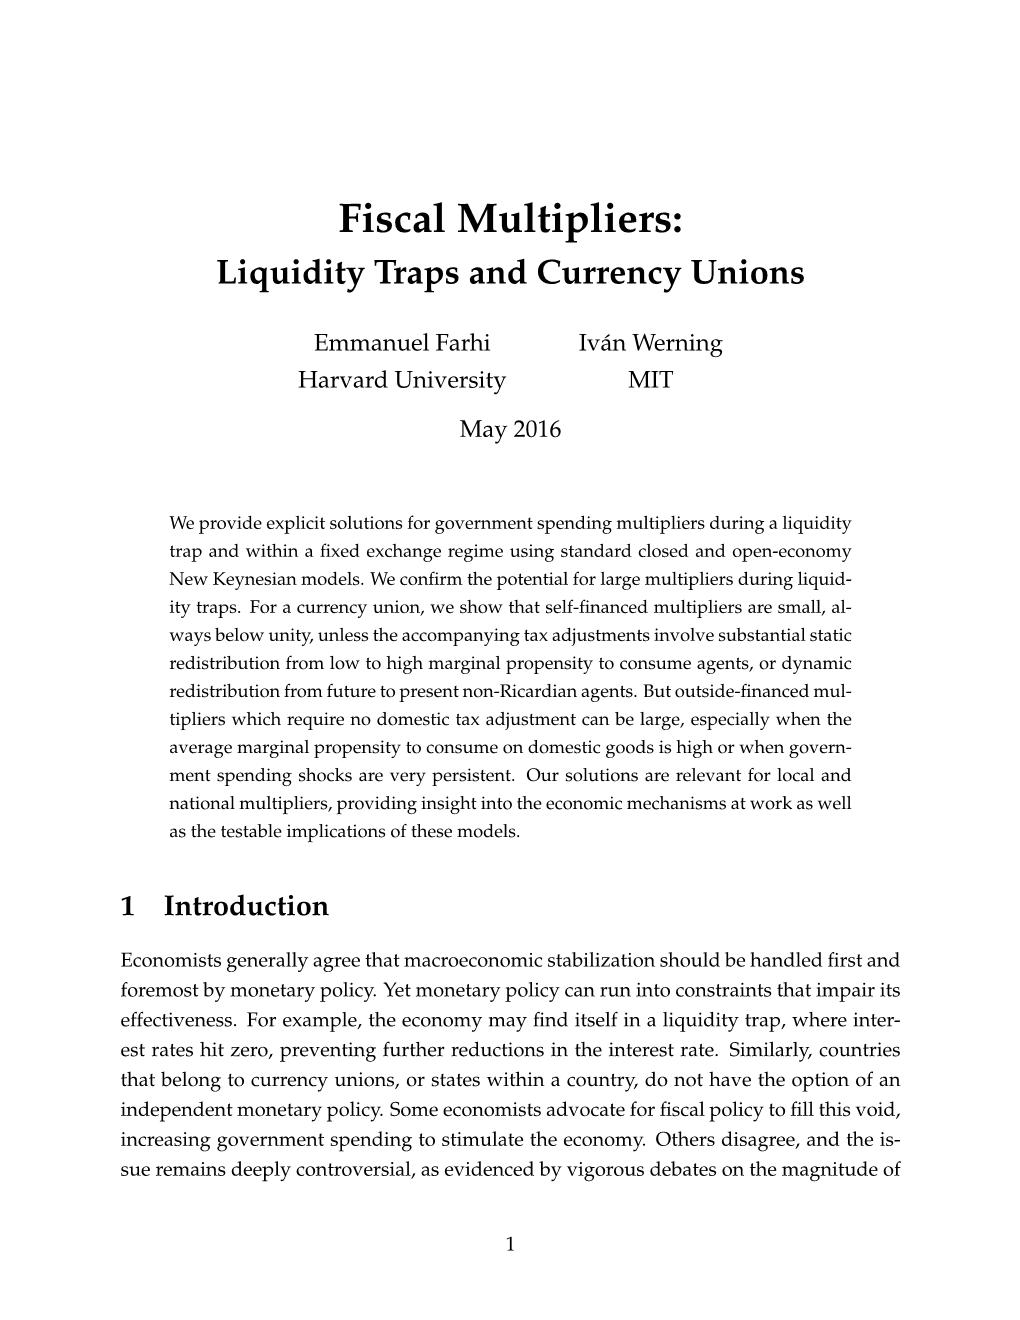 Fiscal Multipliers: Liquidity Traps and Currency Unions